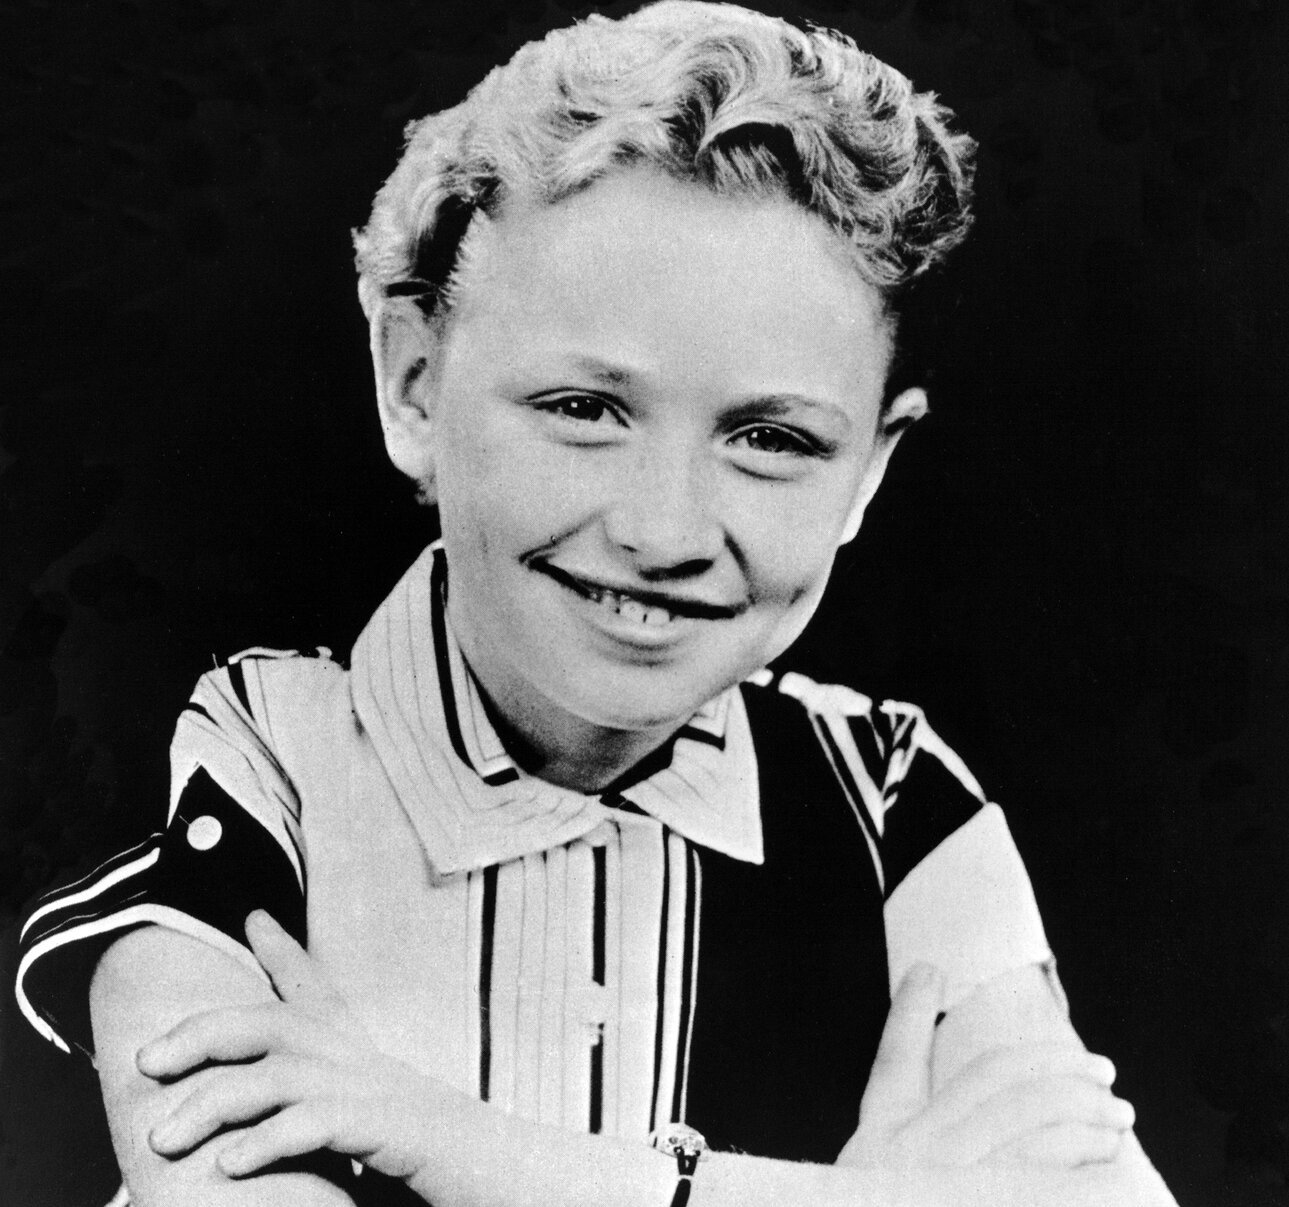 Dolly Parton poses for a portrait as a child in 1955. The photo is black and white. She wears short hair and a collared shirt.